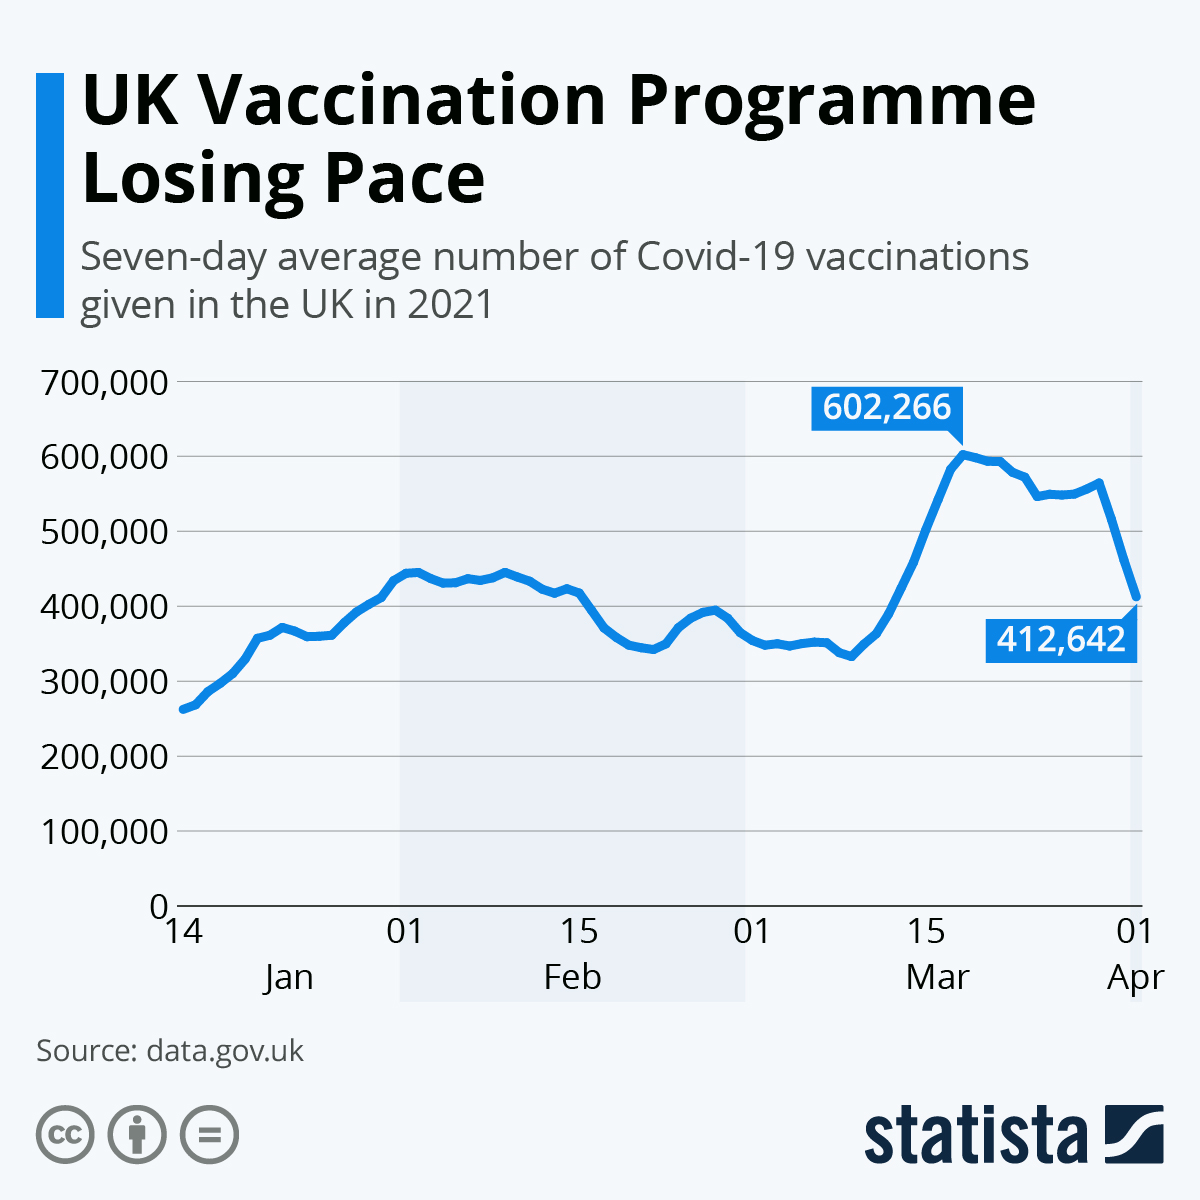 UK Vaccination Programme Losing Pace